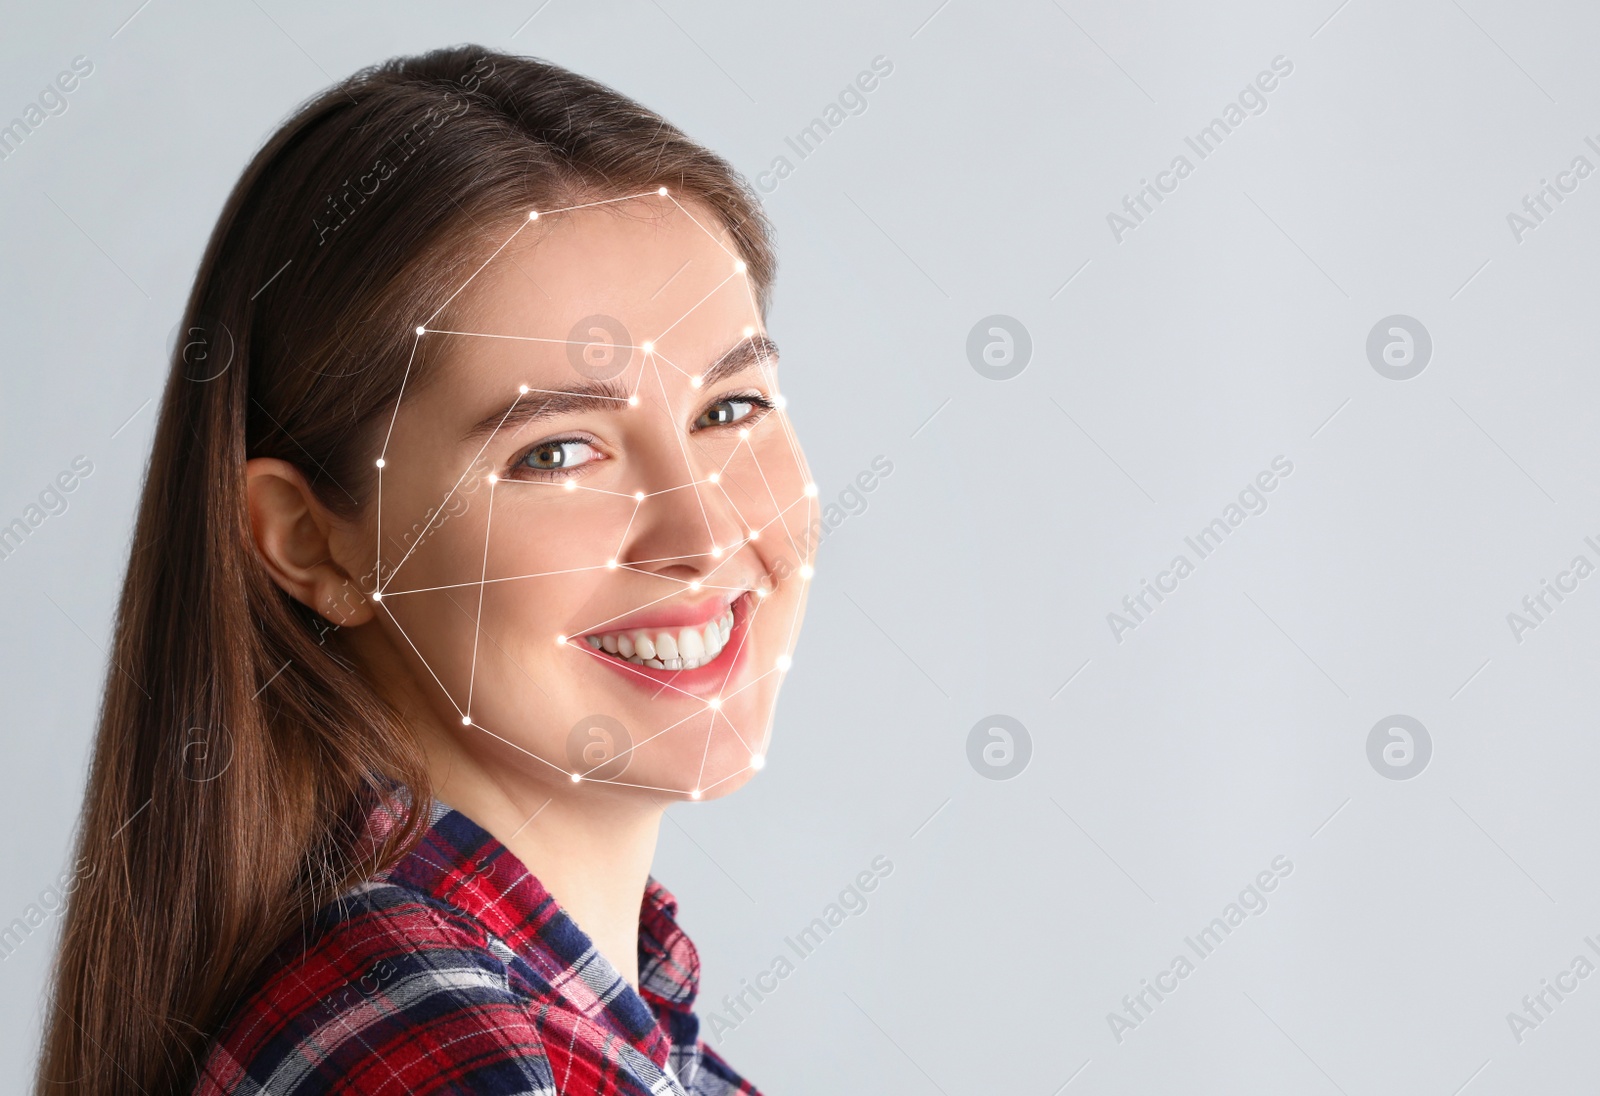 Image of Facial recognition system. Young woman with biometric identification scanning grid on light background, space for text